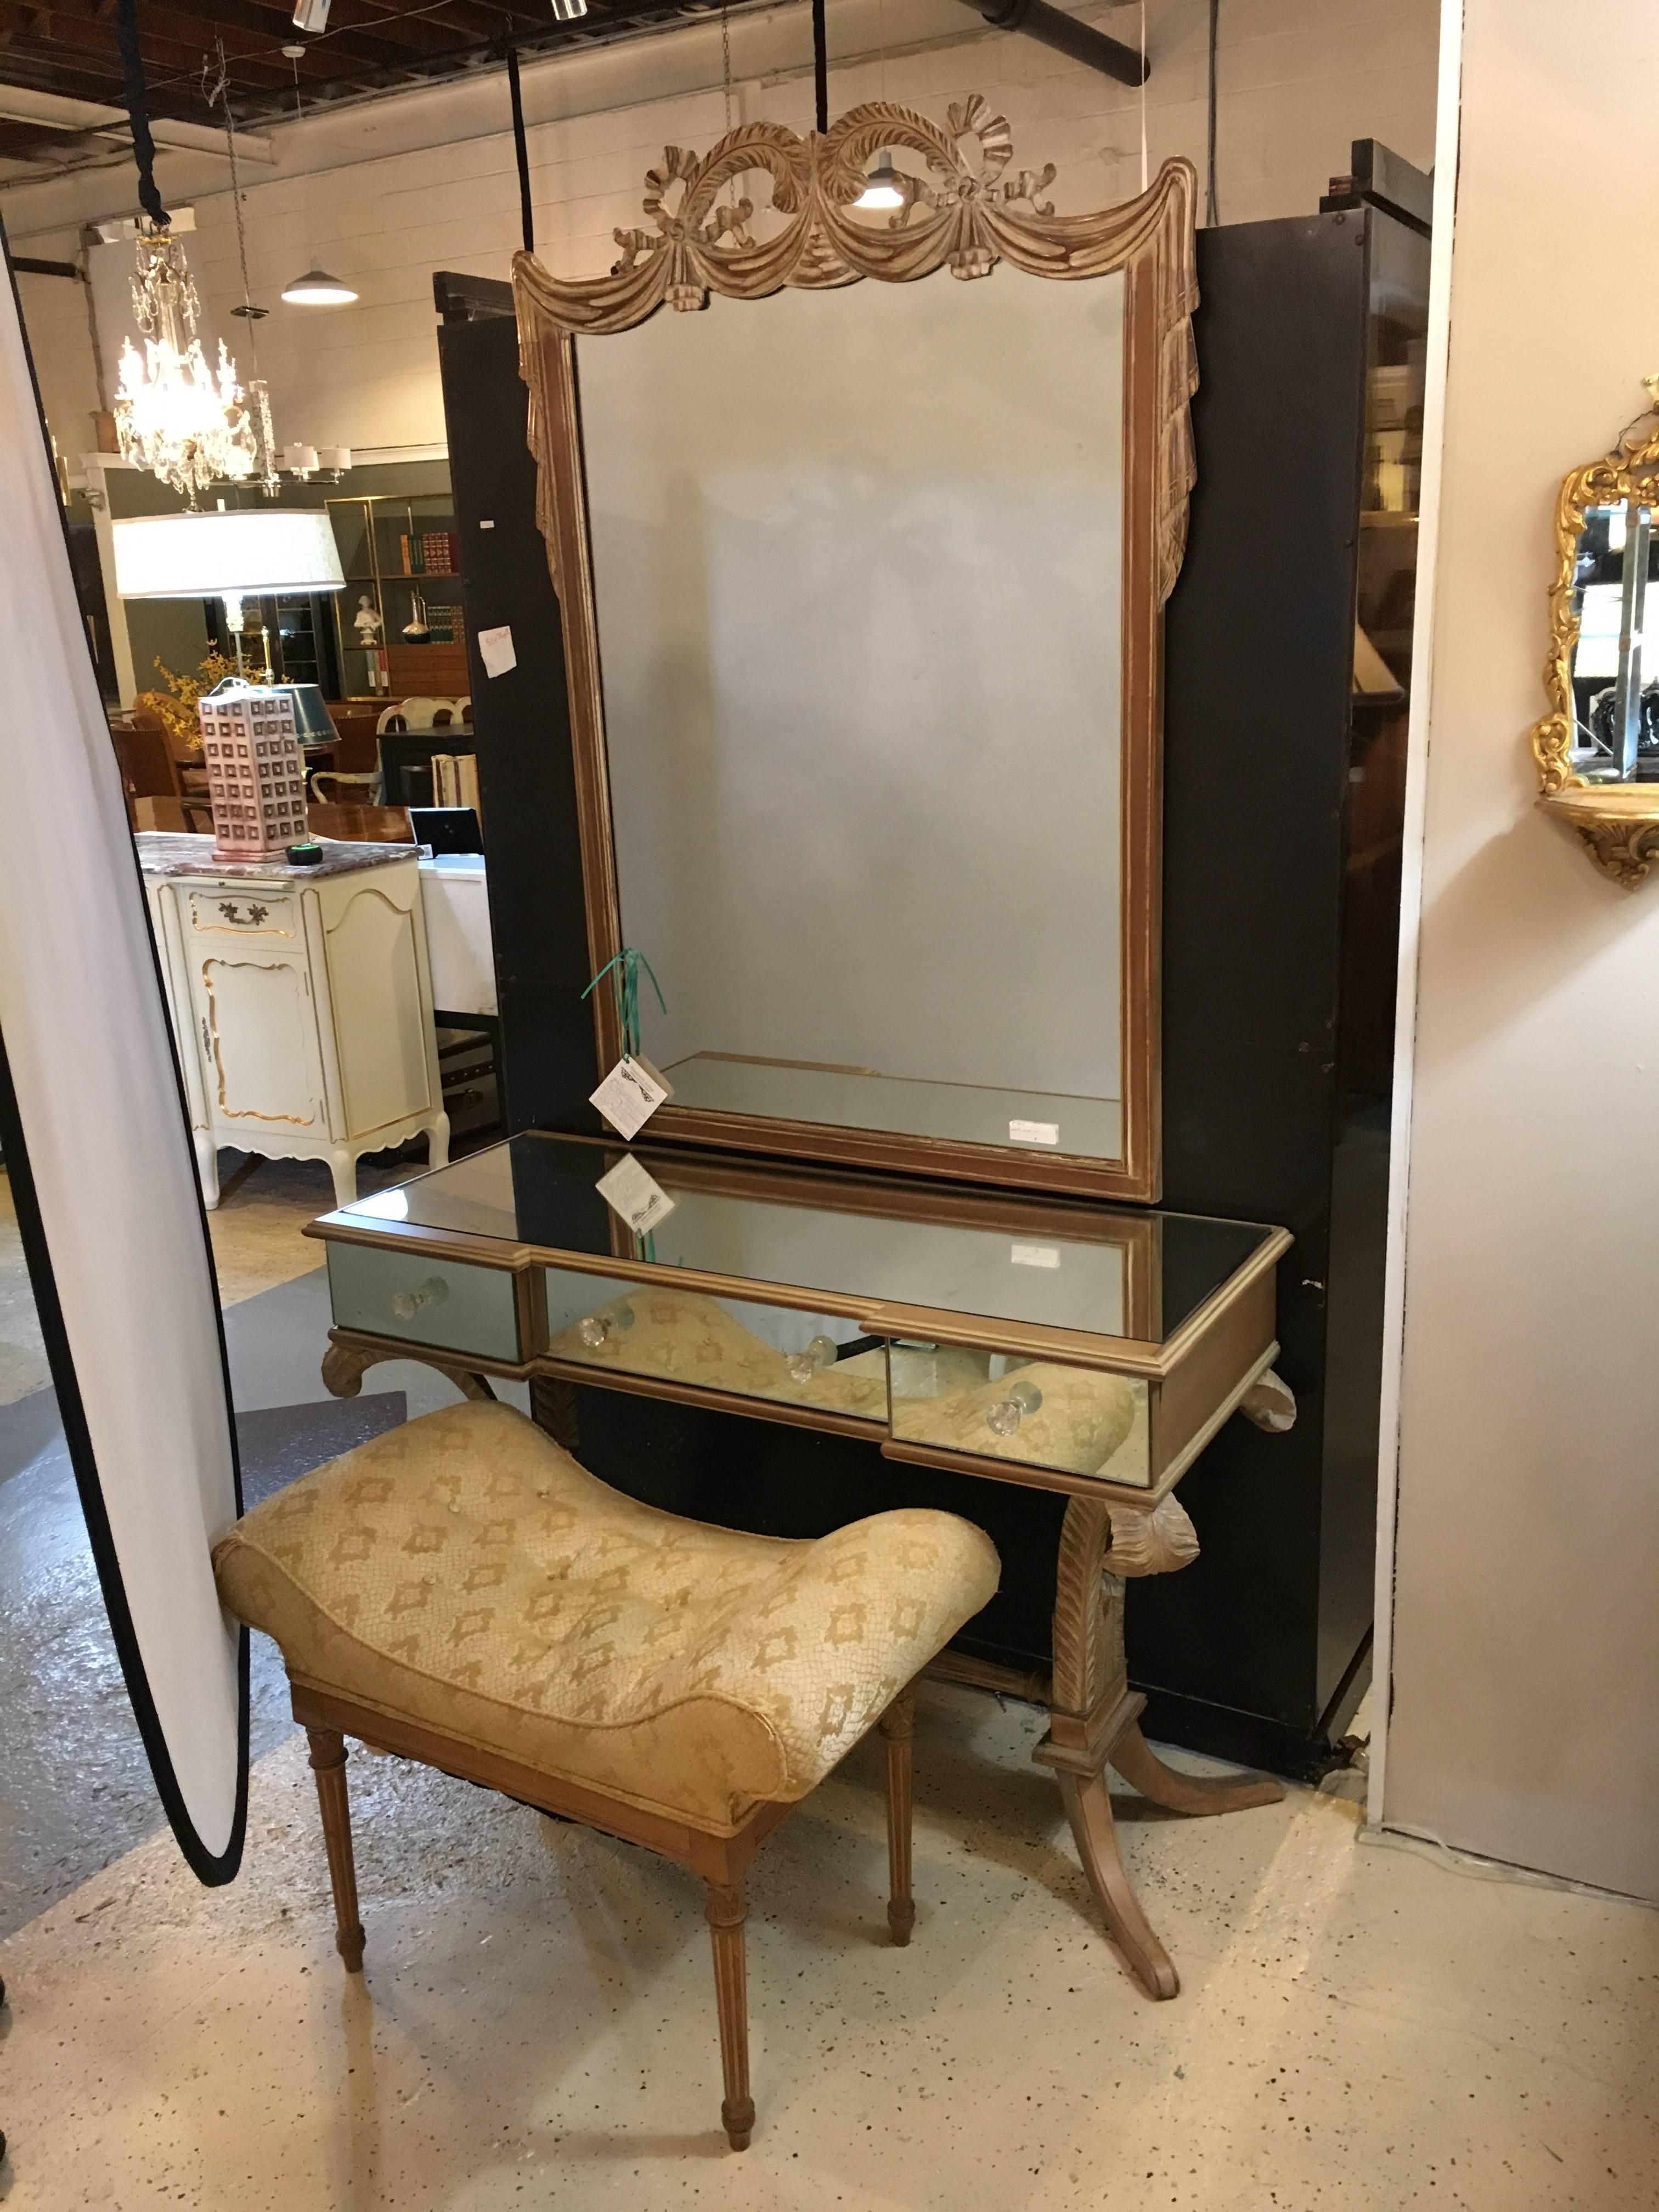 A very fine set of Grosfeld House style Drapery form mirror and Mirrored Vanity Desk w Bench. A fine Hollywood Regency mirrored and pickled finish vanity with Plume design legs. The legs supporting an apron of three mirrored drawer fronts, the